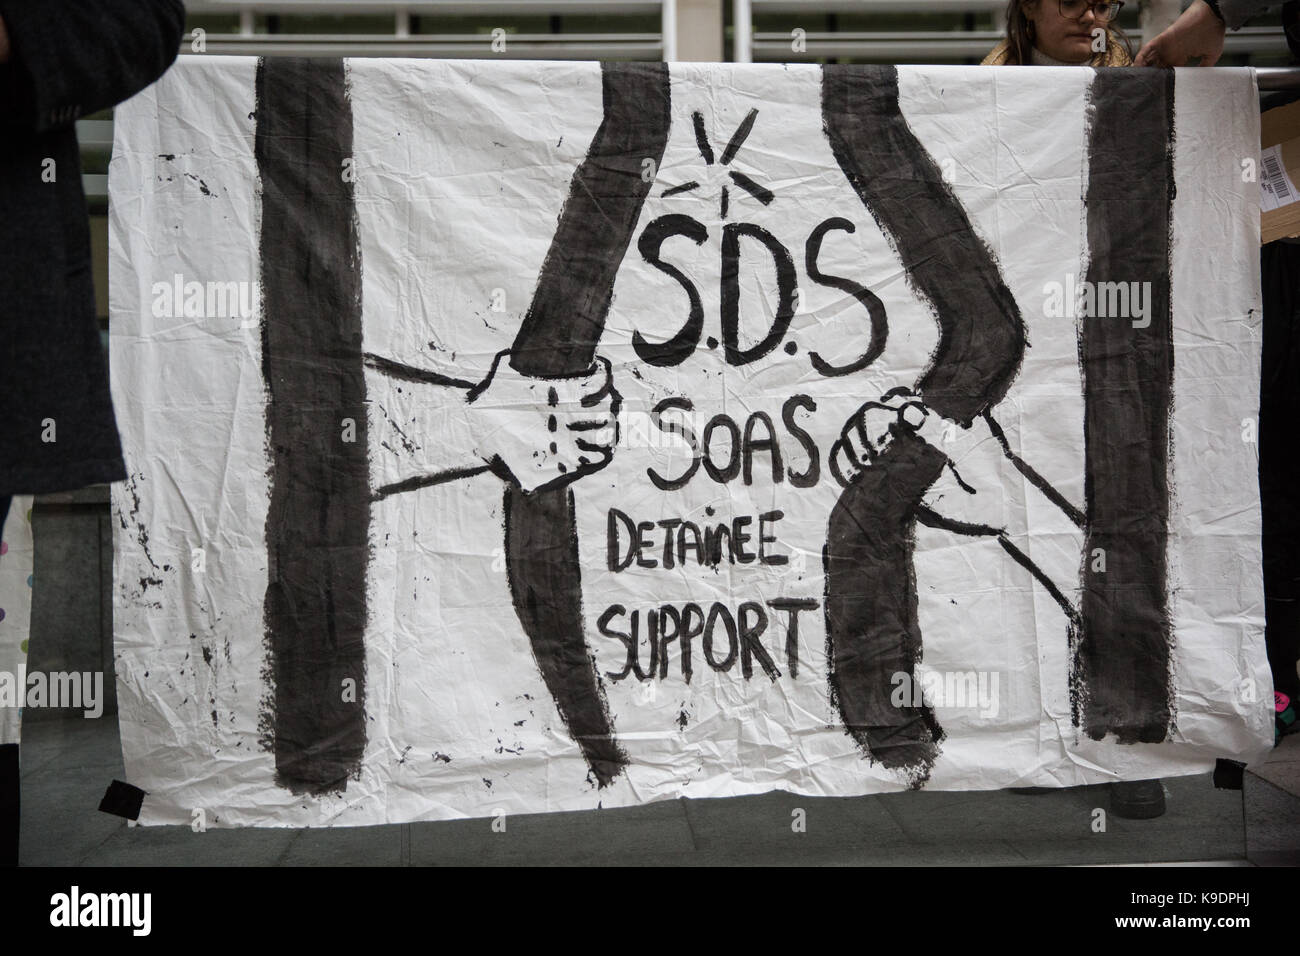 London, UK. 21st September, 2017.  A banner used by campaigners from SOAS Detainee Support (SDS) at an emergency vigil outside the Home Office. Stock Photo